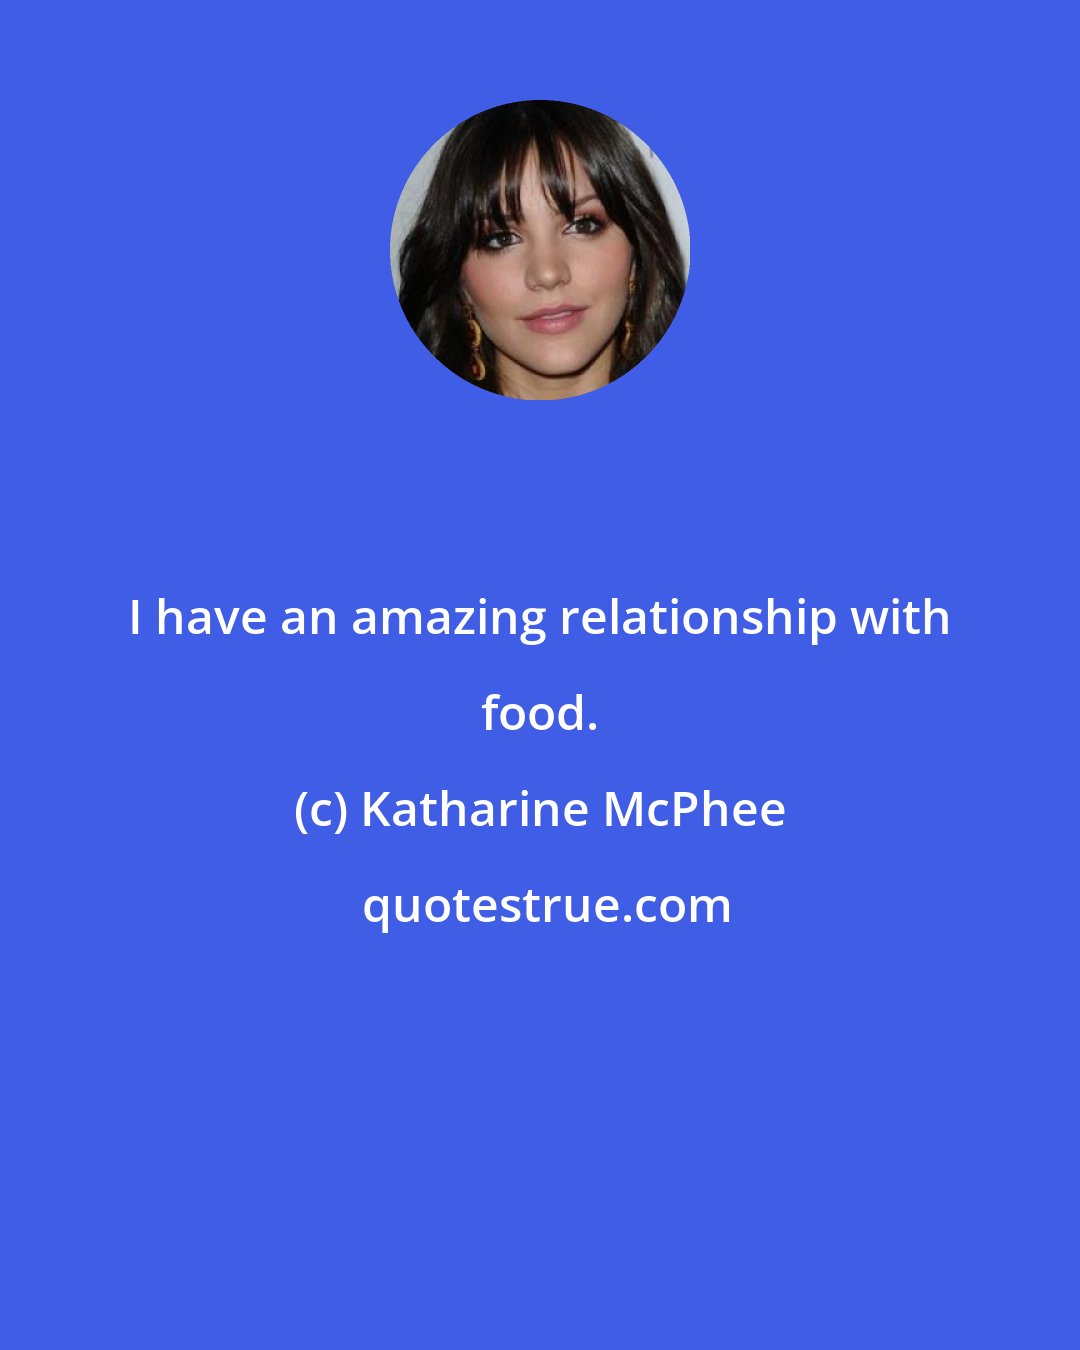 Katharine McPhee: I have an amazing relationship with food.